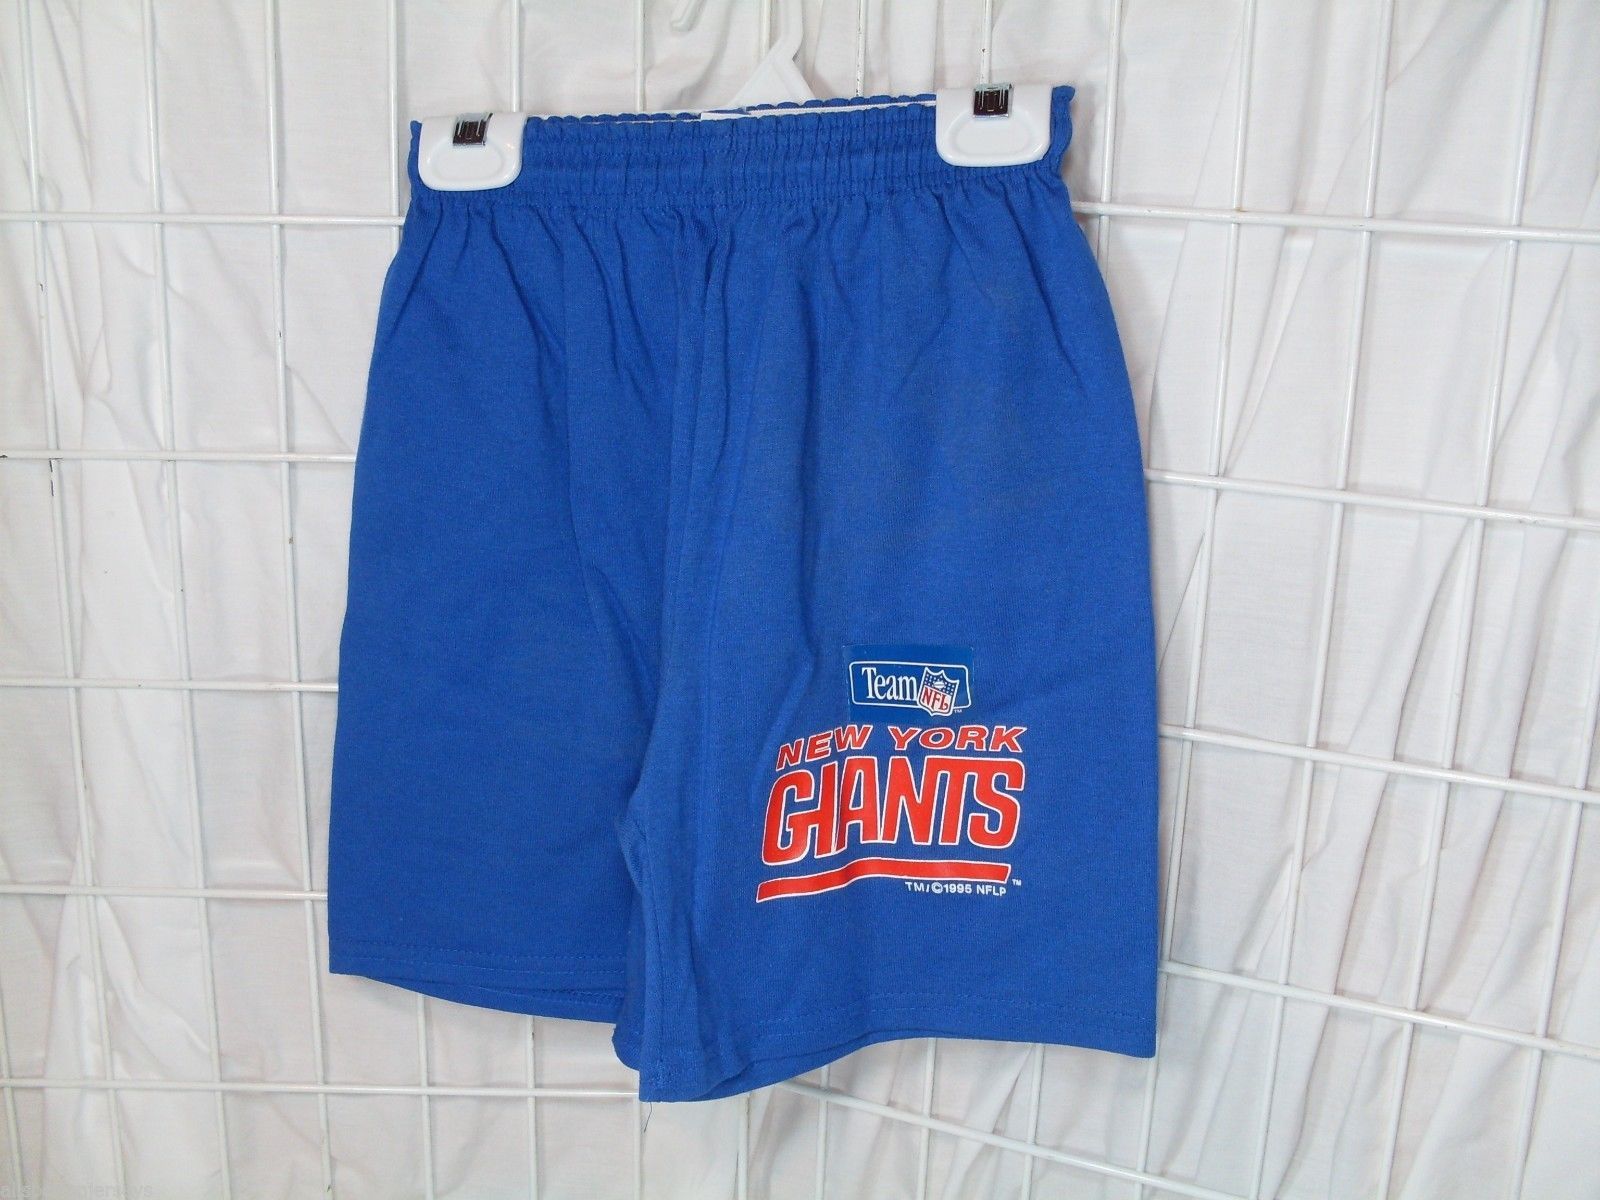 Primary image for NFL New York Giants Logo Screen Printed on Blue Shorts Size Youth L(14-16)